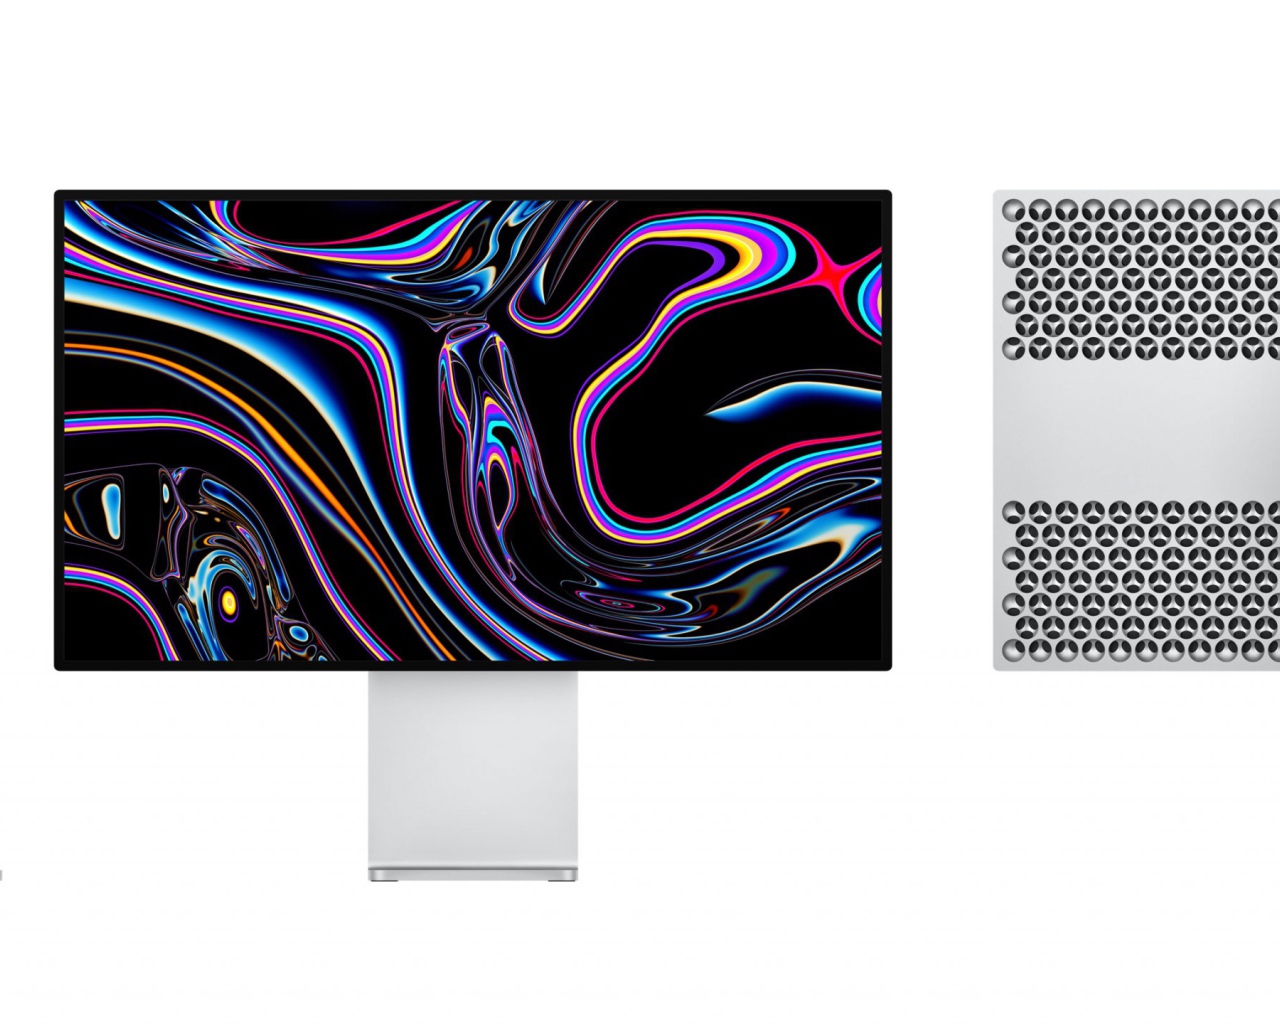 Apple Pro Display XDR monitor, 2019 on a white background